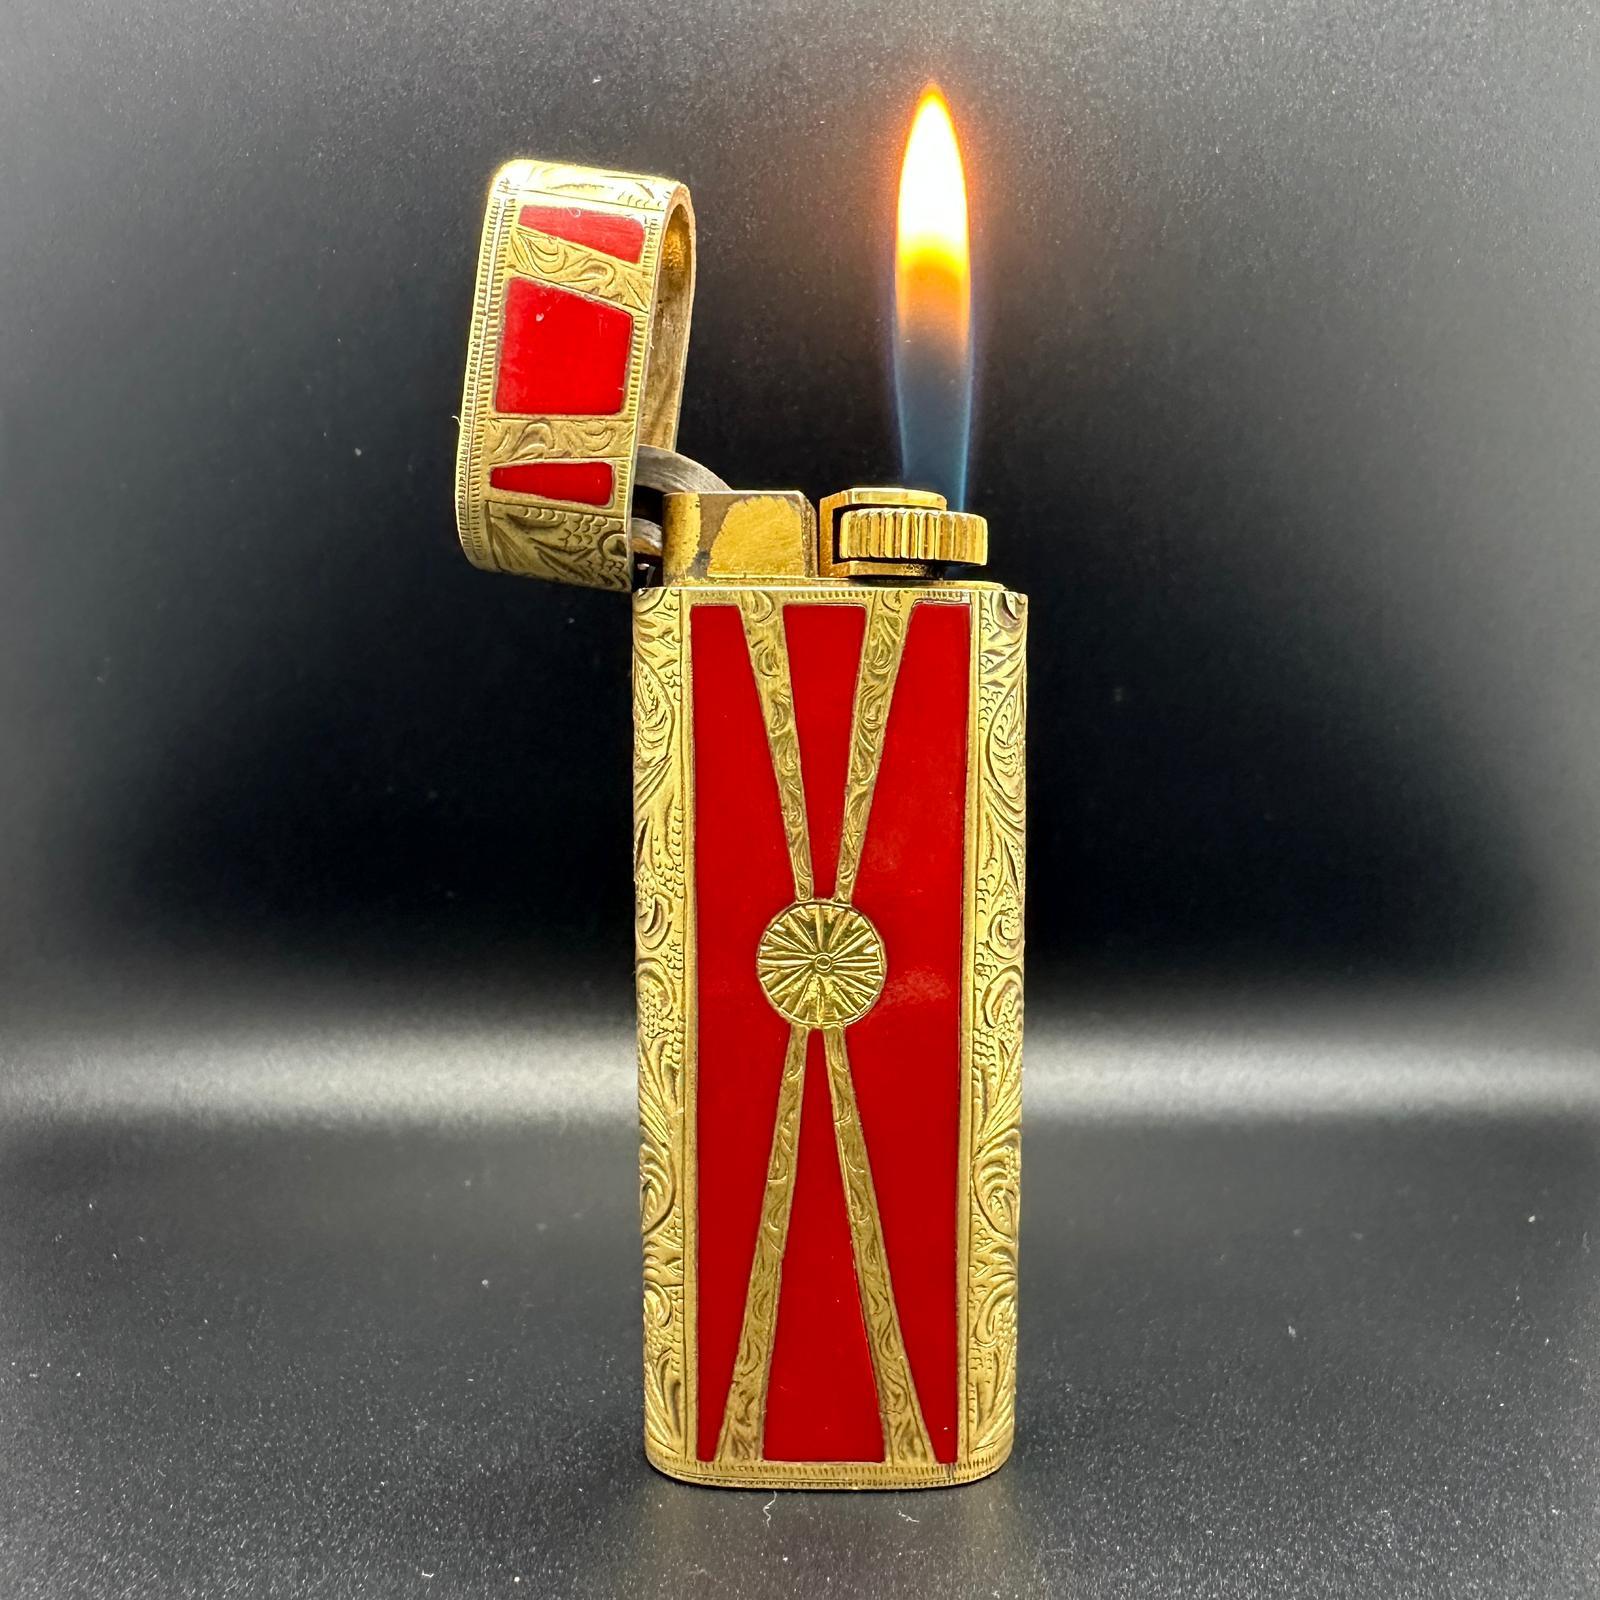 Cartier Roy king lighter.
Cartier Roy King Rollagas, a Unique RARE example of a ROY KING designed Cartier Rollagas lighter made circa 1970's, 18 K Gold with Red with Red Art Deco lacquer, mint condition.
Roy King emblem on top side part of